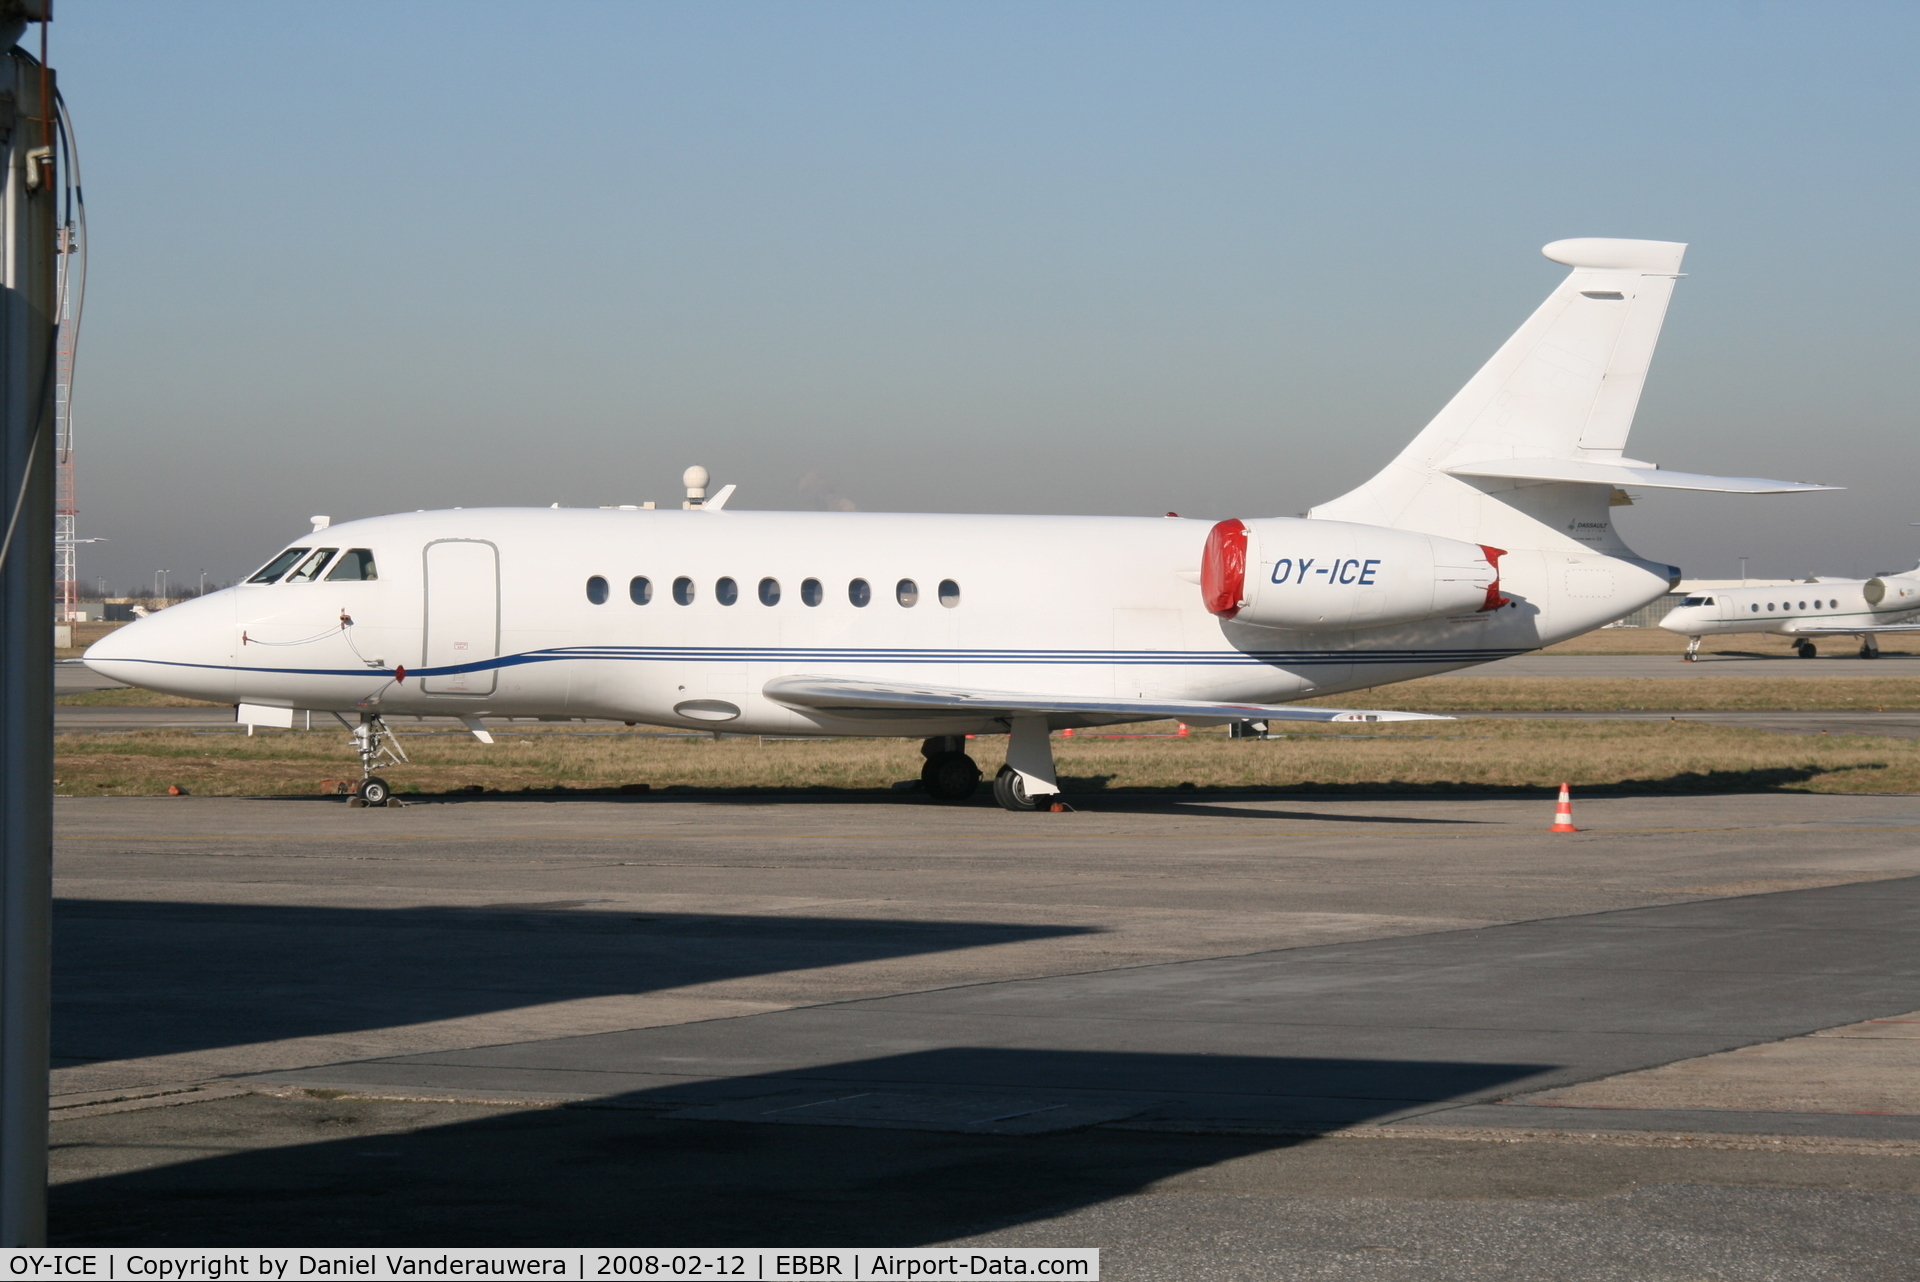 OY-ICE, 1996 Dassault Falcon 2000 C/N 026, parked on General Aviation apron (Abelag)